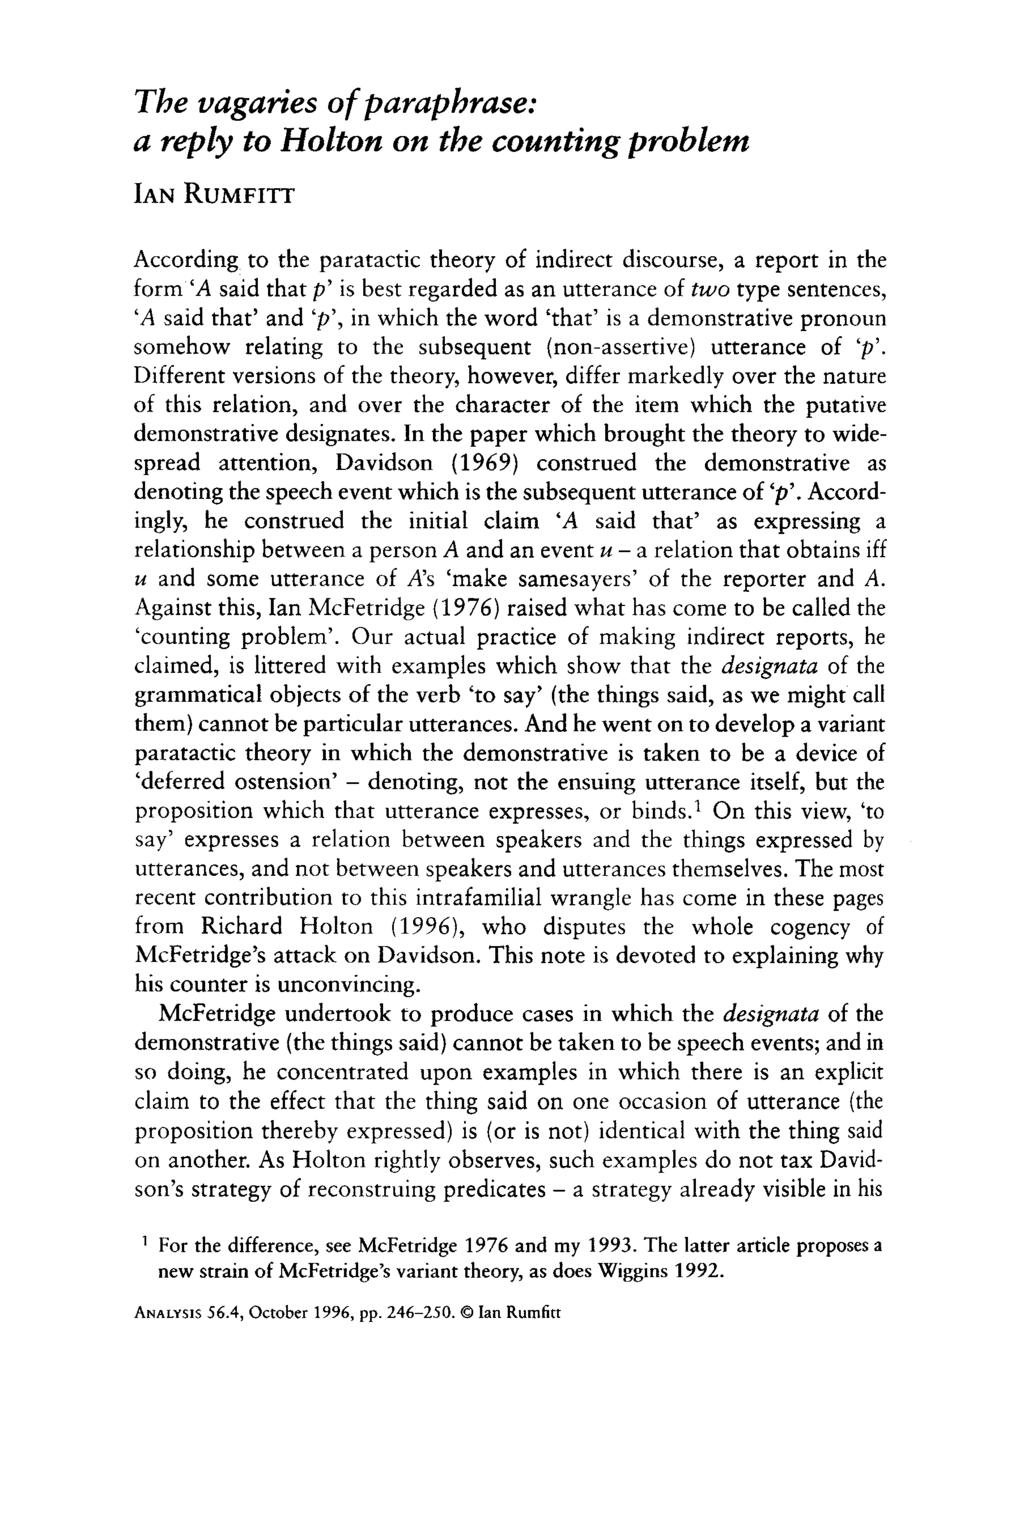 The vagaries of paraphrase: a reply to Holton on the counting problem IAN RUMFITT According to the paratactic theory of indirect discourse, a report in the form A said that p is best regarded as an